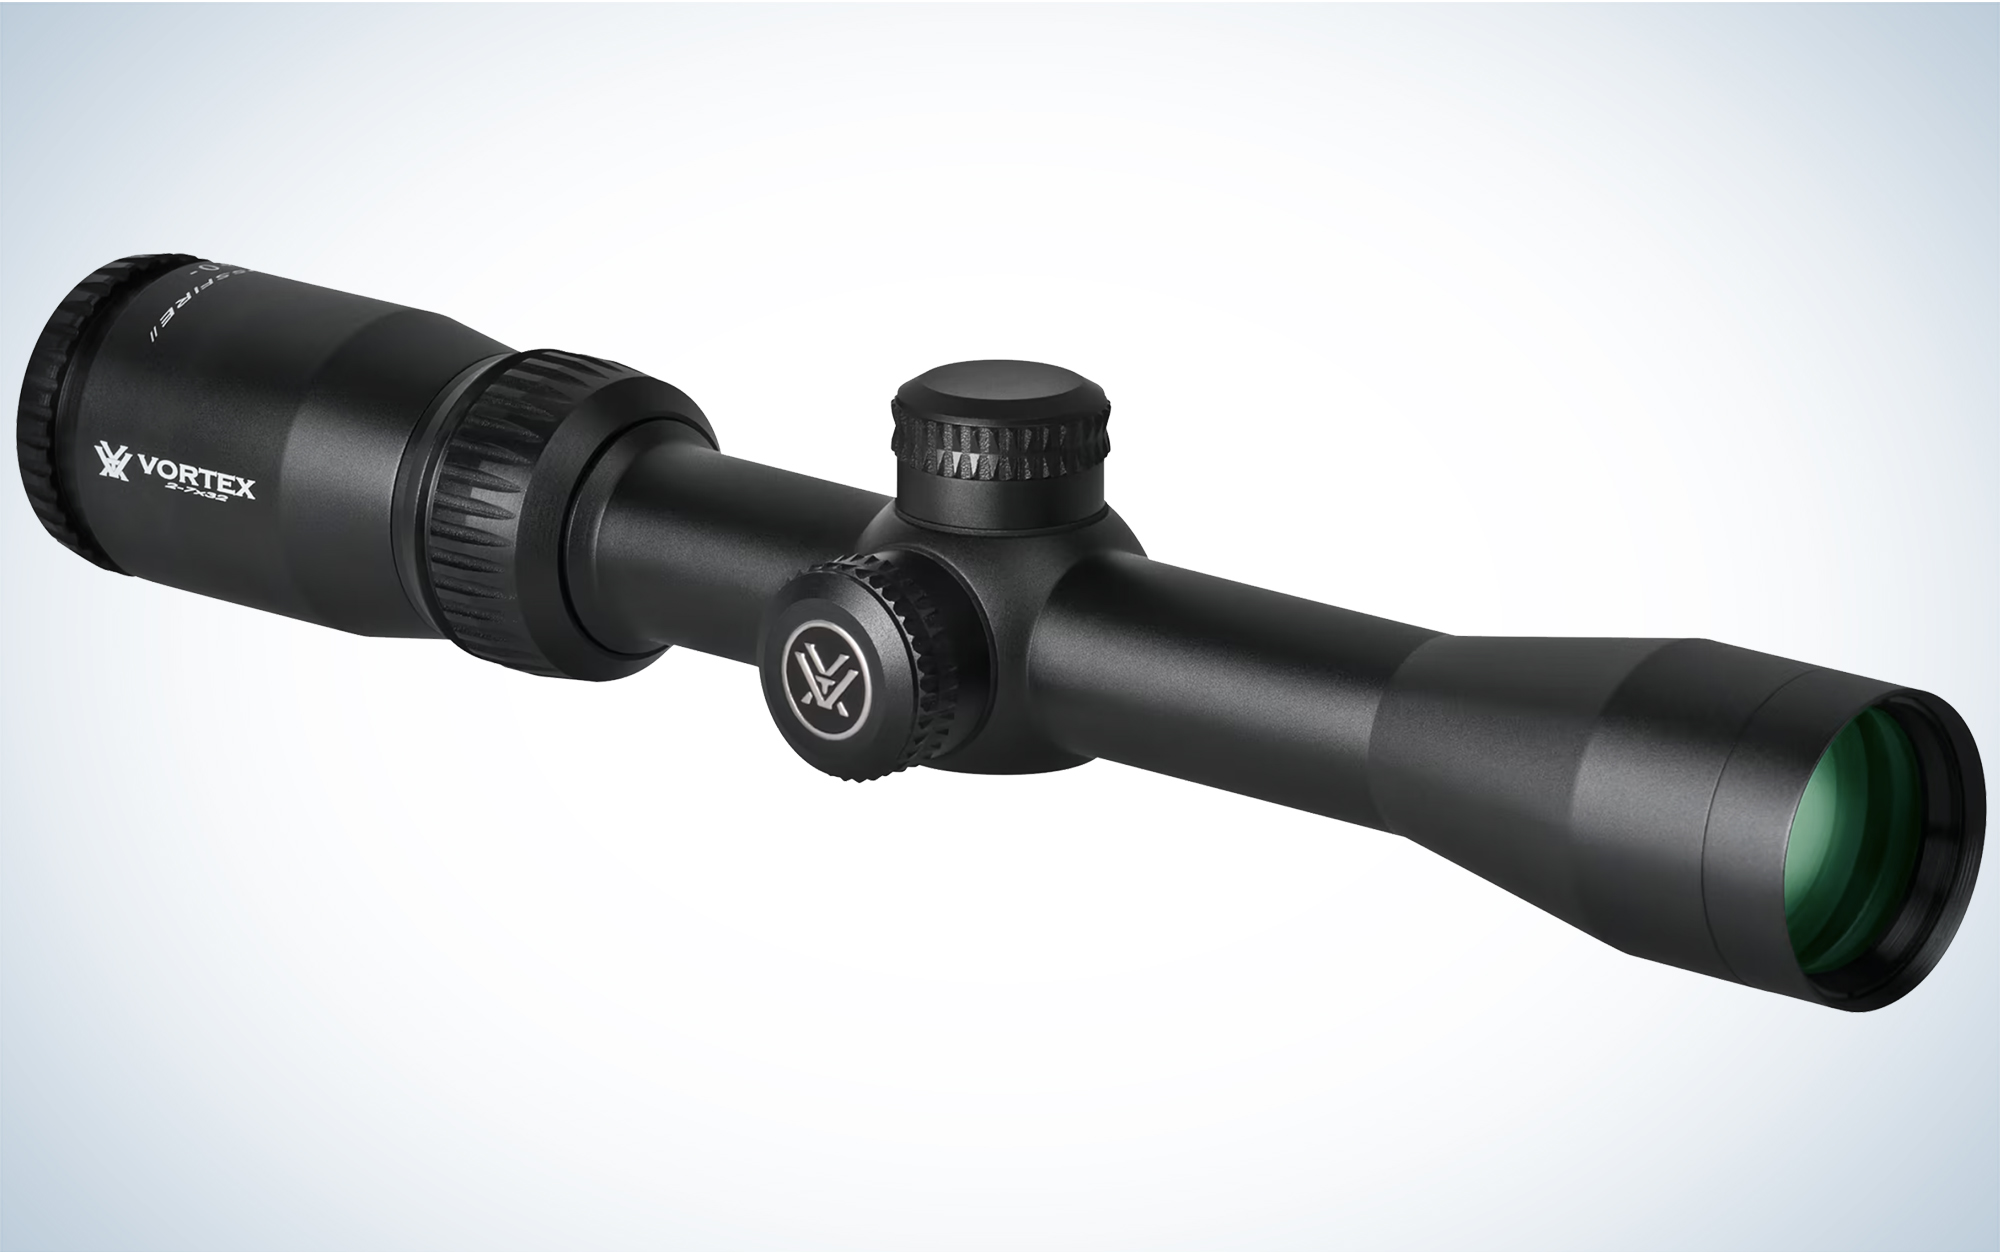 The Vortex Crossfire II 2-7x32 is the best traditional rimfire scope.